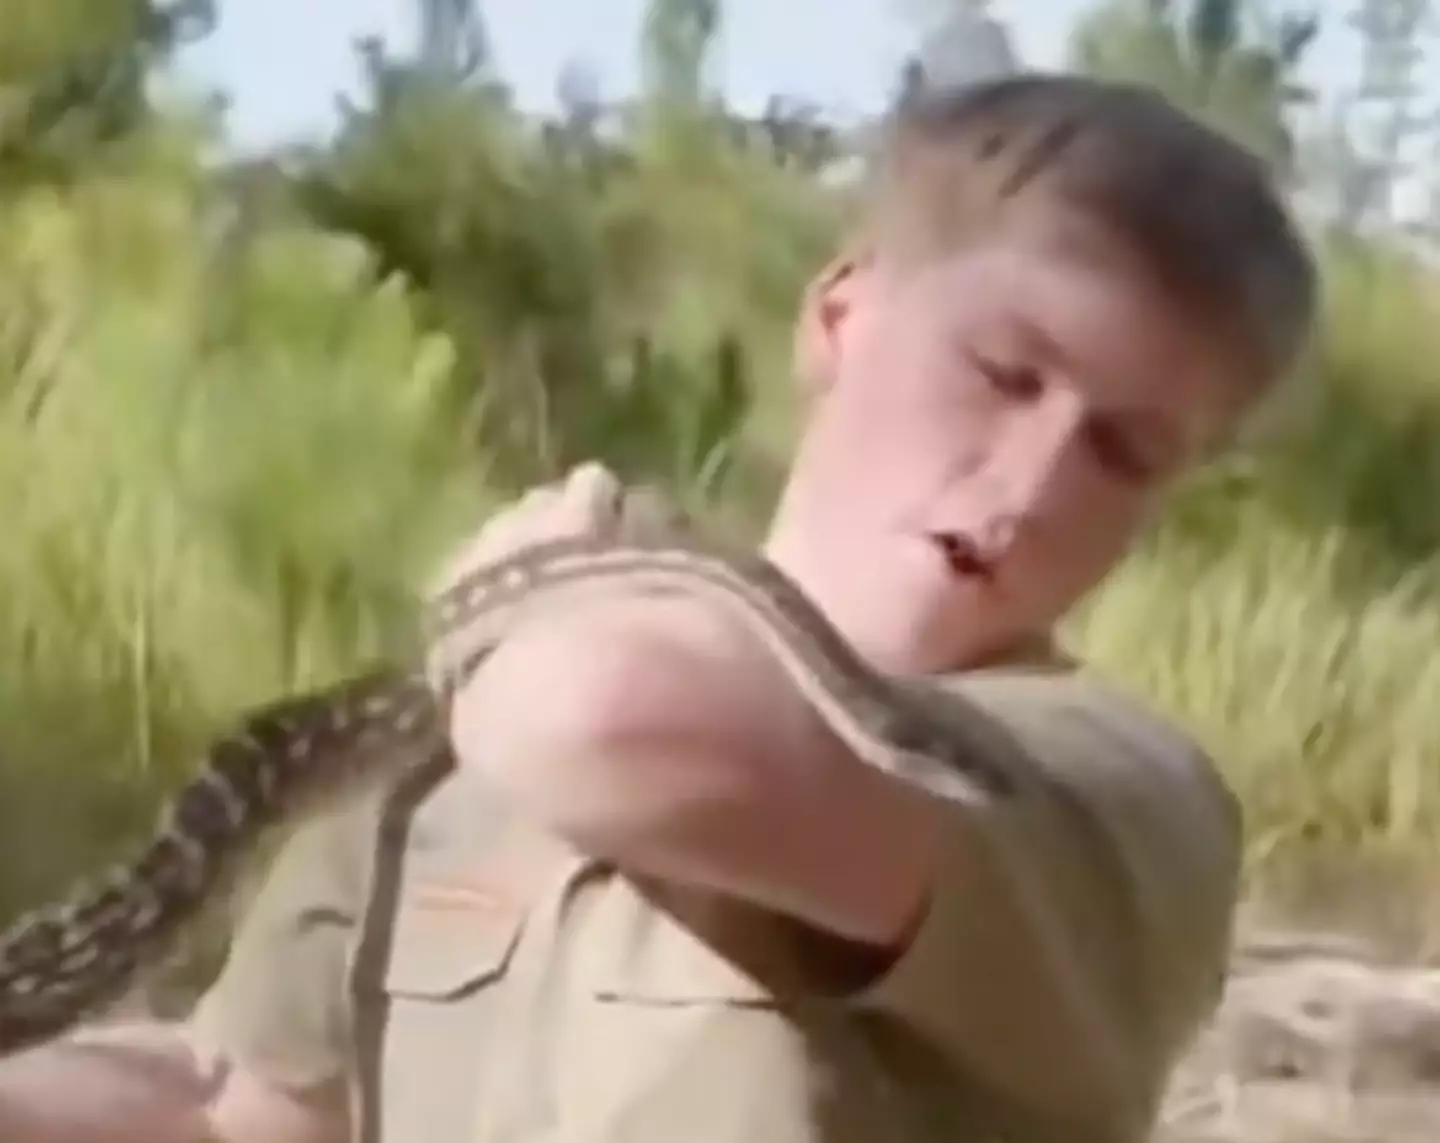 Robert Irwin recreated the moment after finding a python himself.